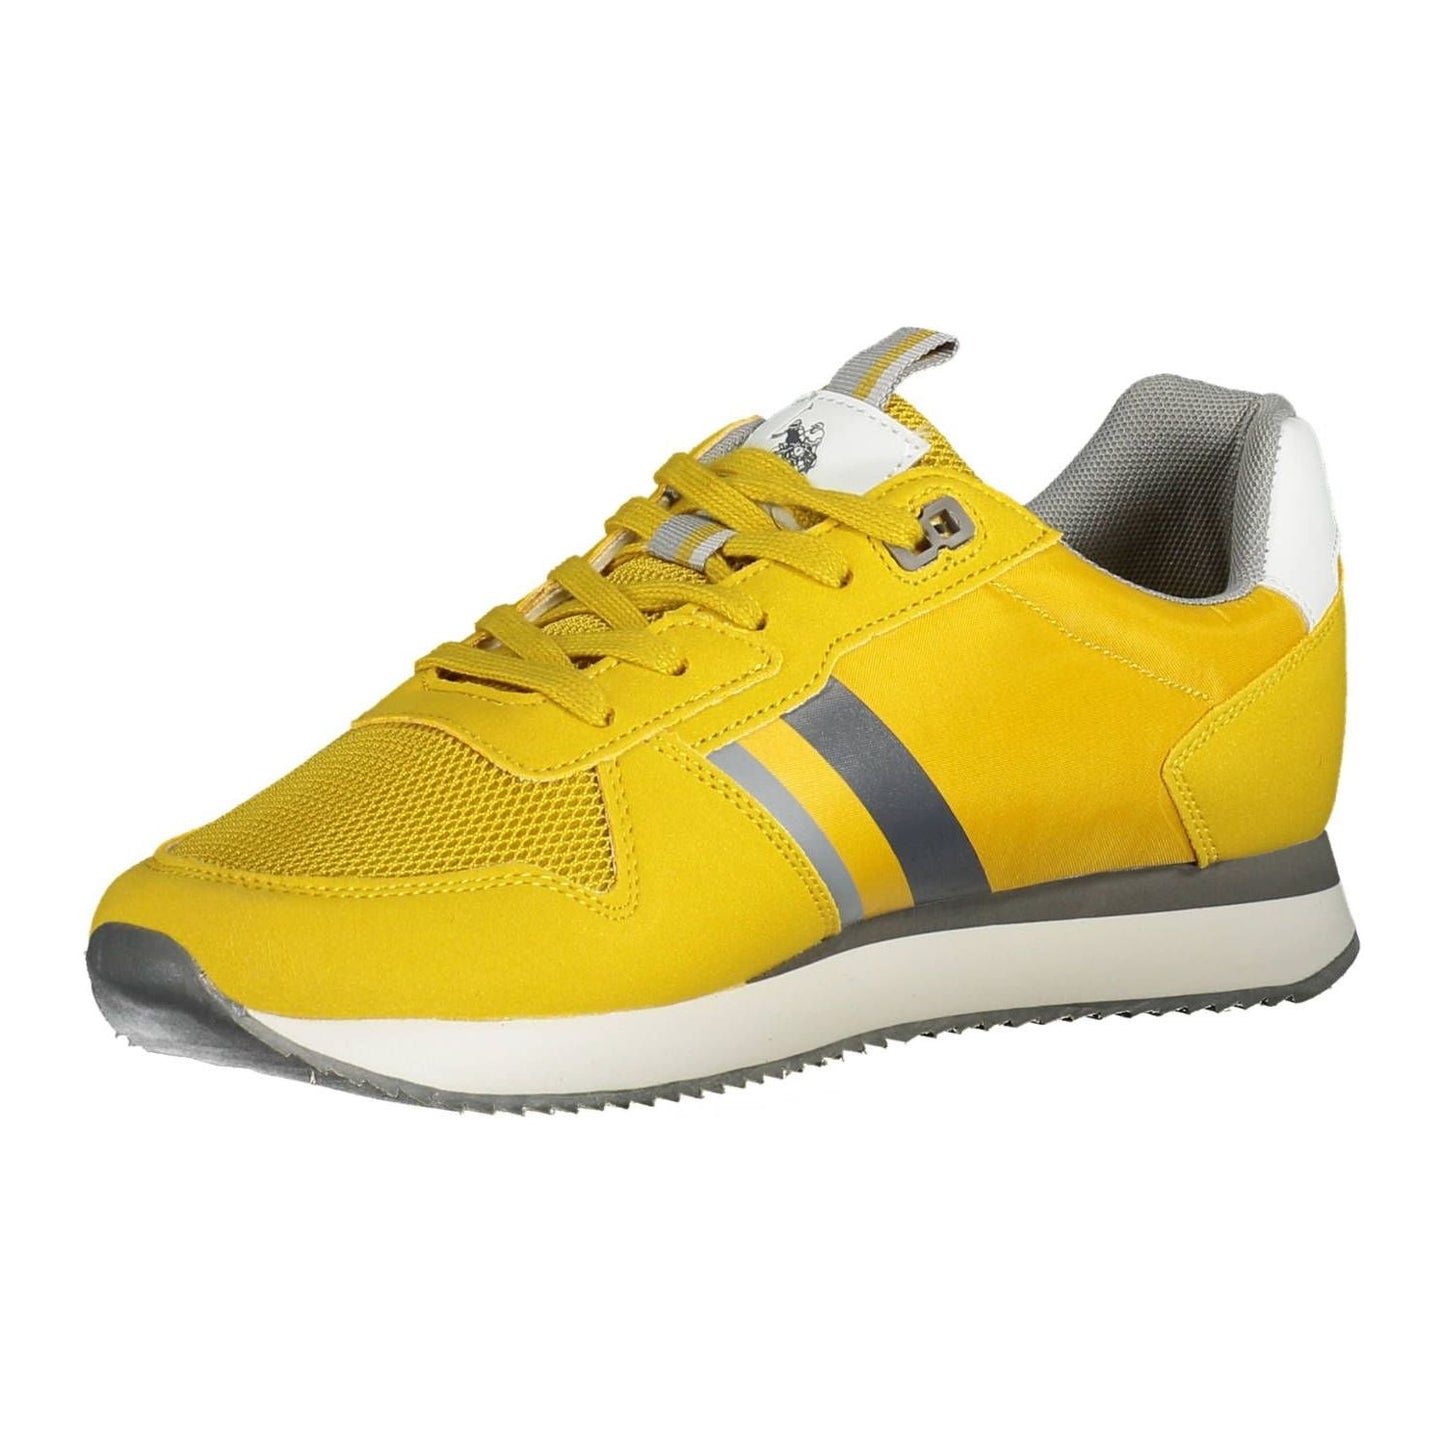 U.S. POLO ASSN. Radiant Yellow Sports Sneakers with Contrasting Details radiant-yellow-sports-sneakers-with-contrasting-details